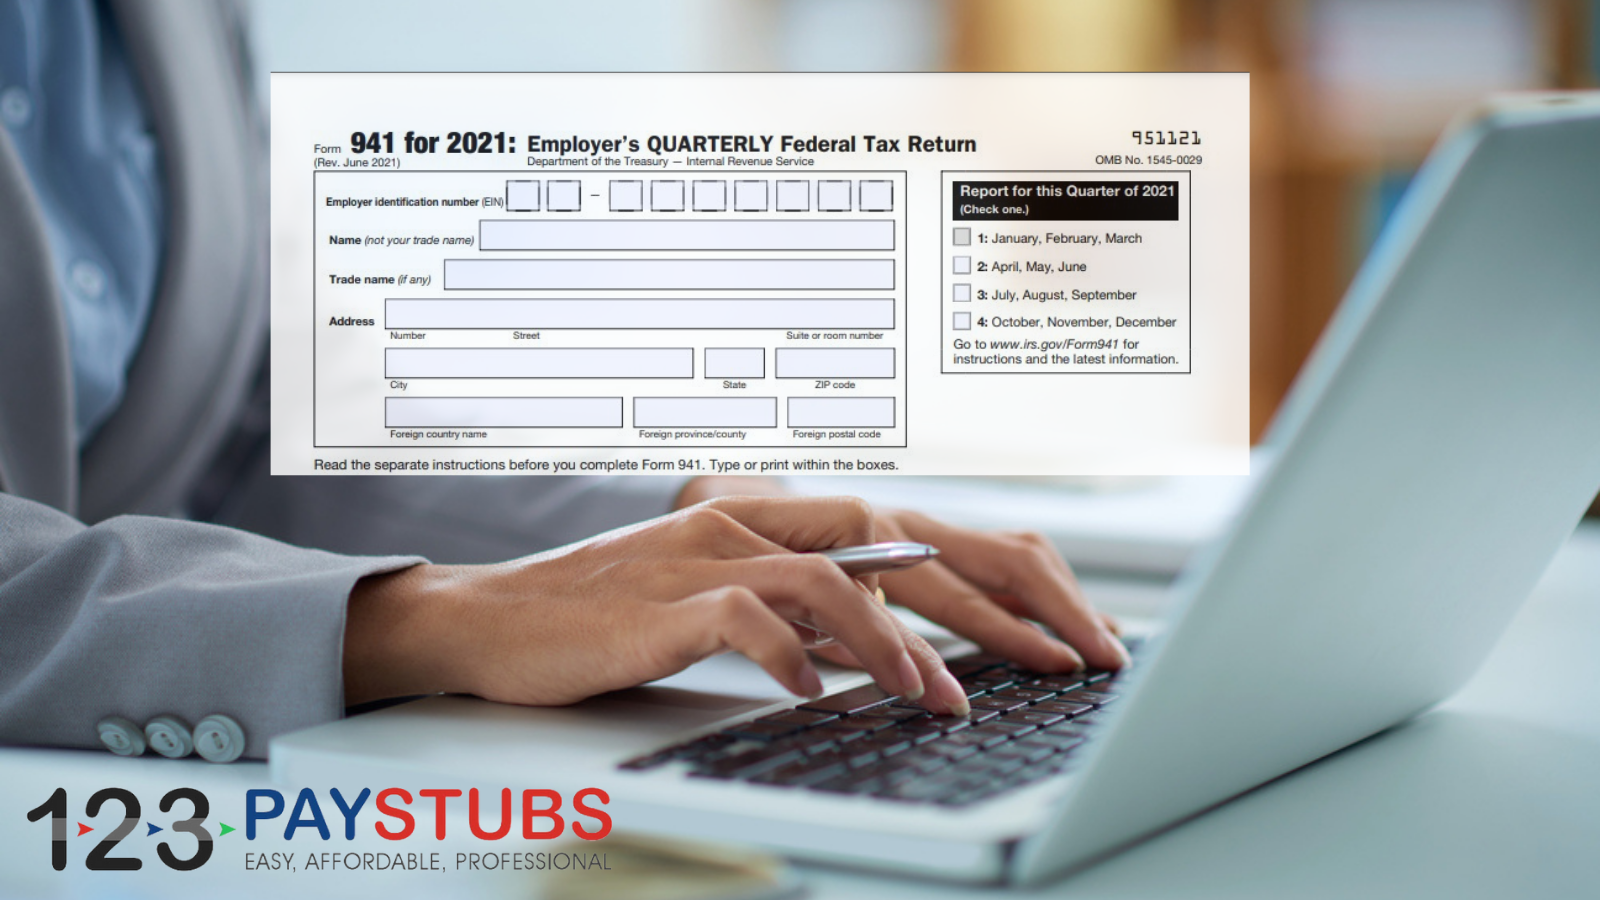 A Simple Guide for Filing Form 941 for 2021 123PayStubs Blog